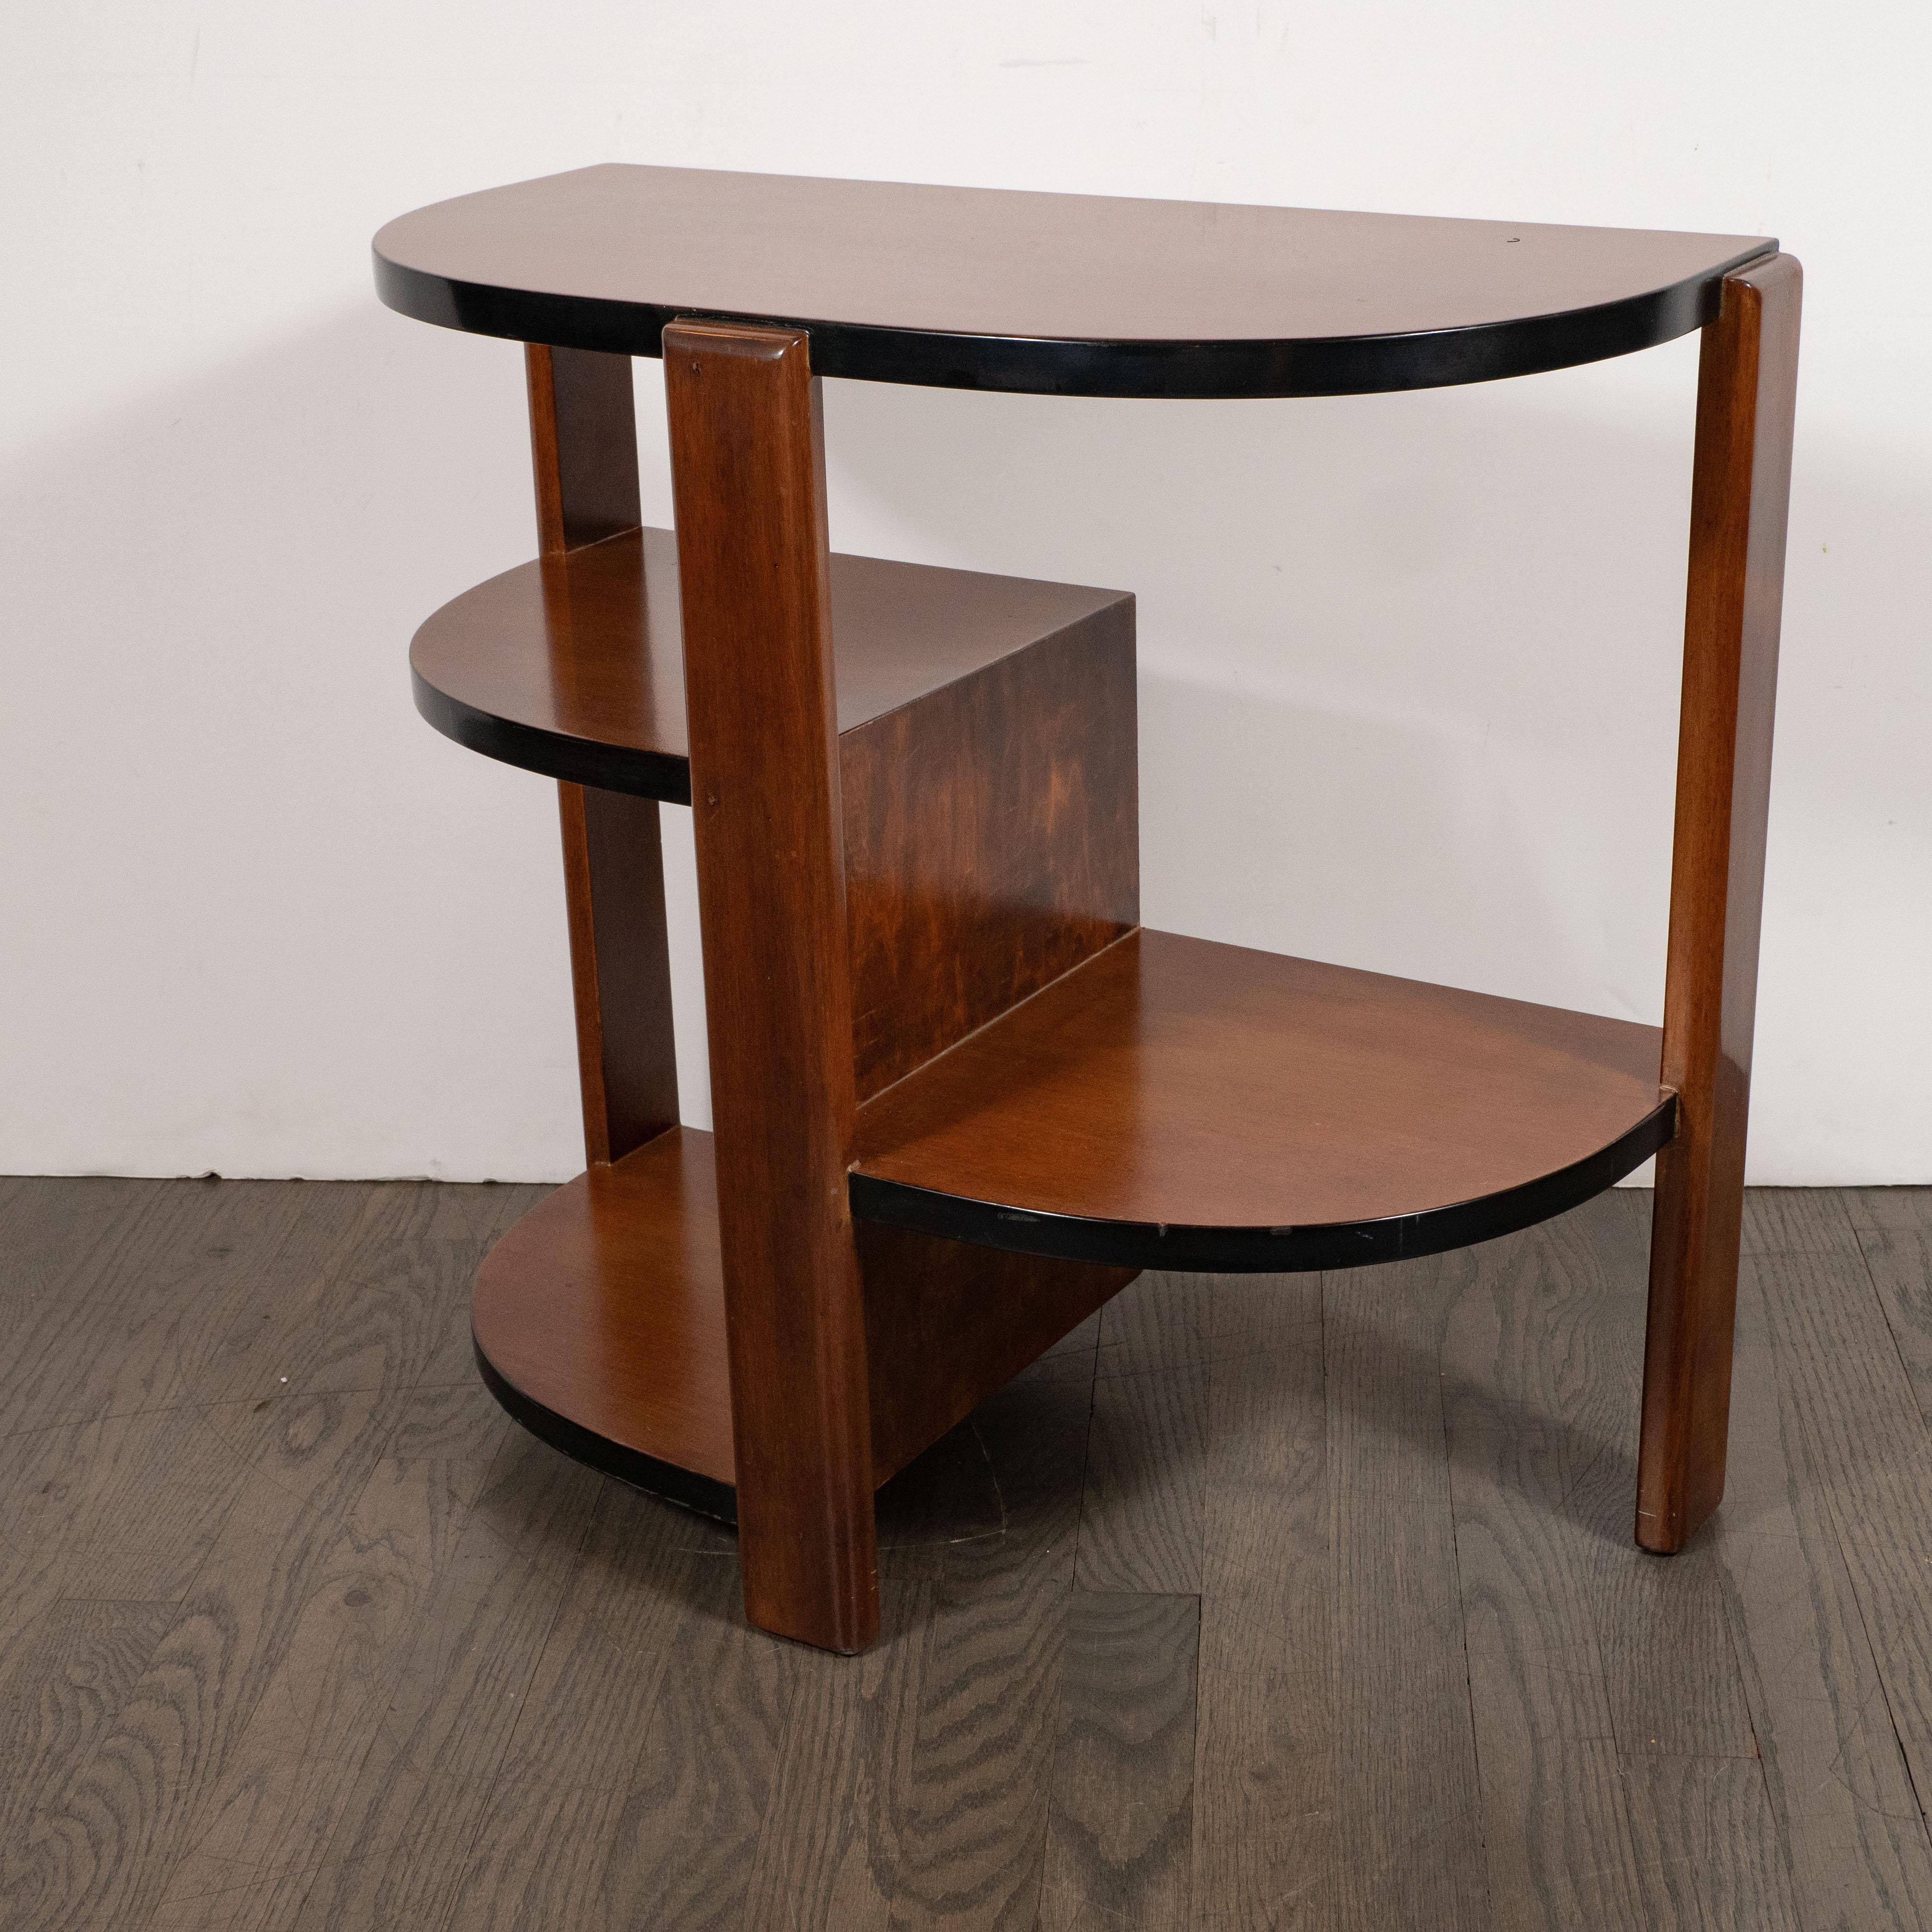 Mid-20th Century Art Deco Machine Age Bookmatched Walnut & Black Lacquer 4-Tier End/Side Table